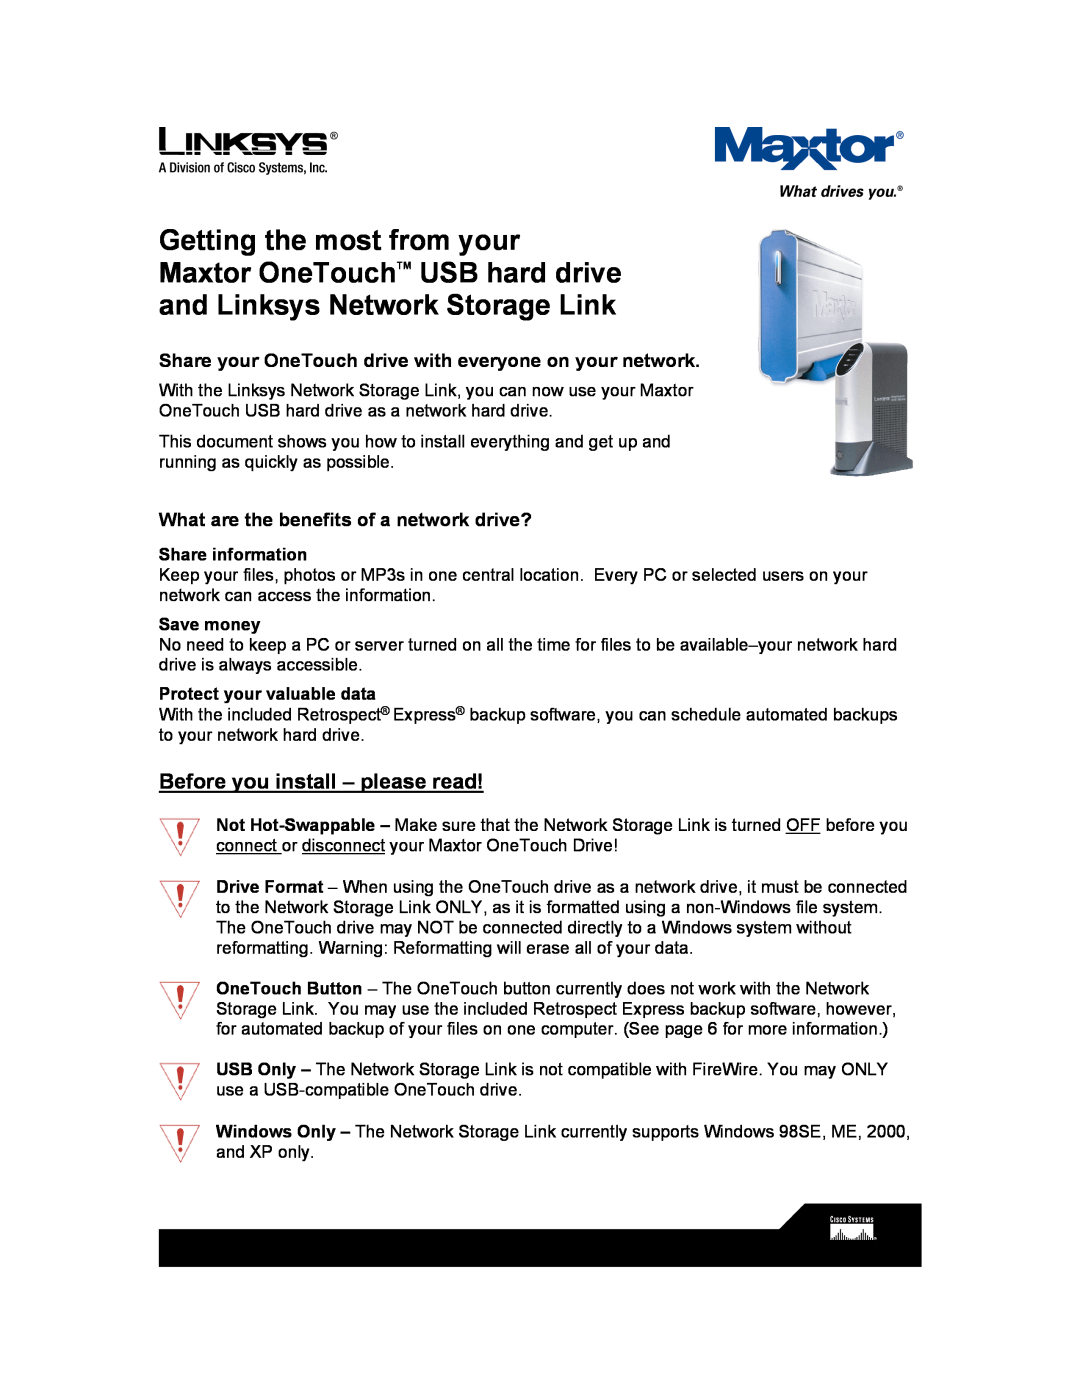 Linksys LKG0F755E manual Before you install - please read, Share information, Save money, Protect your valuable data 